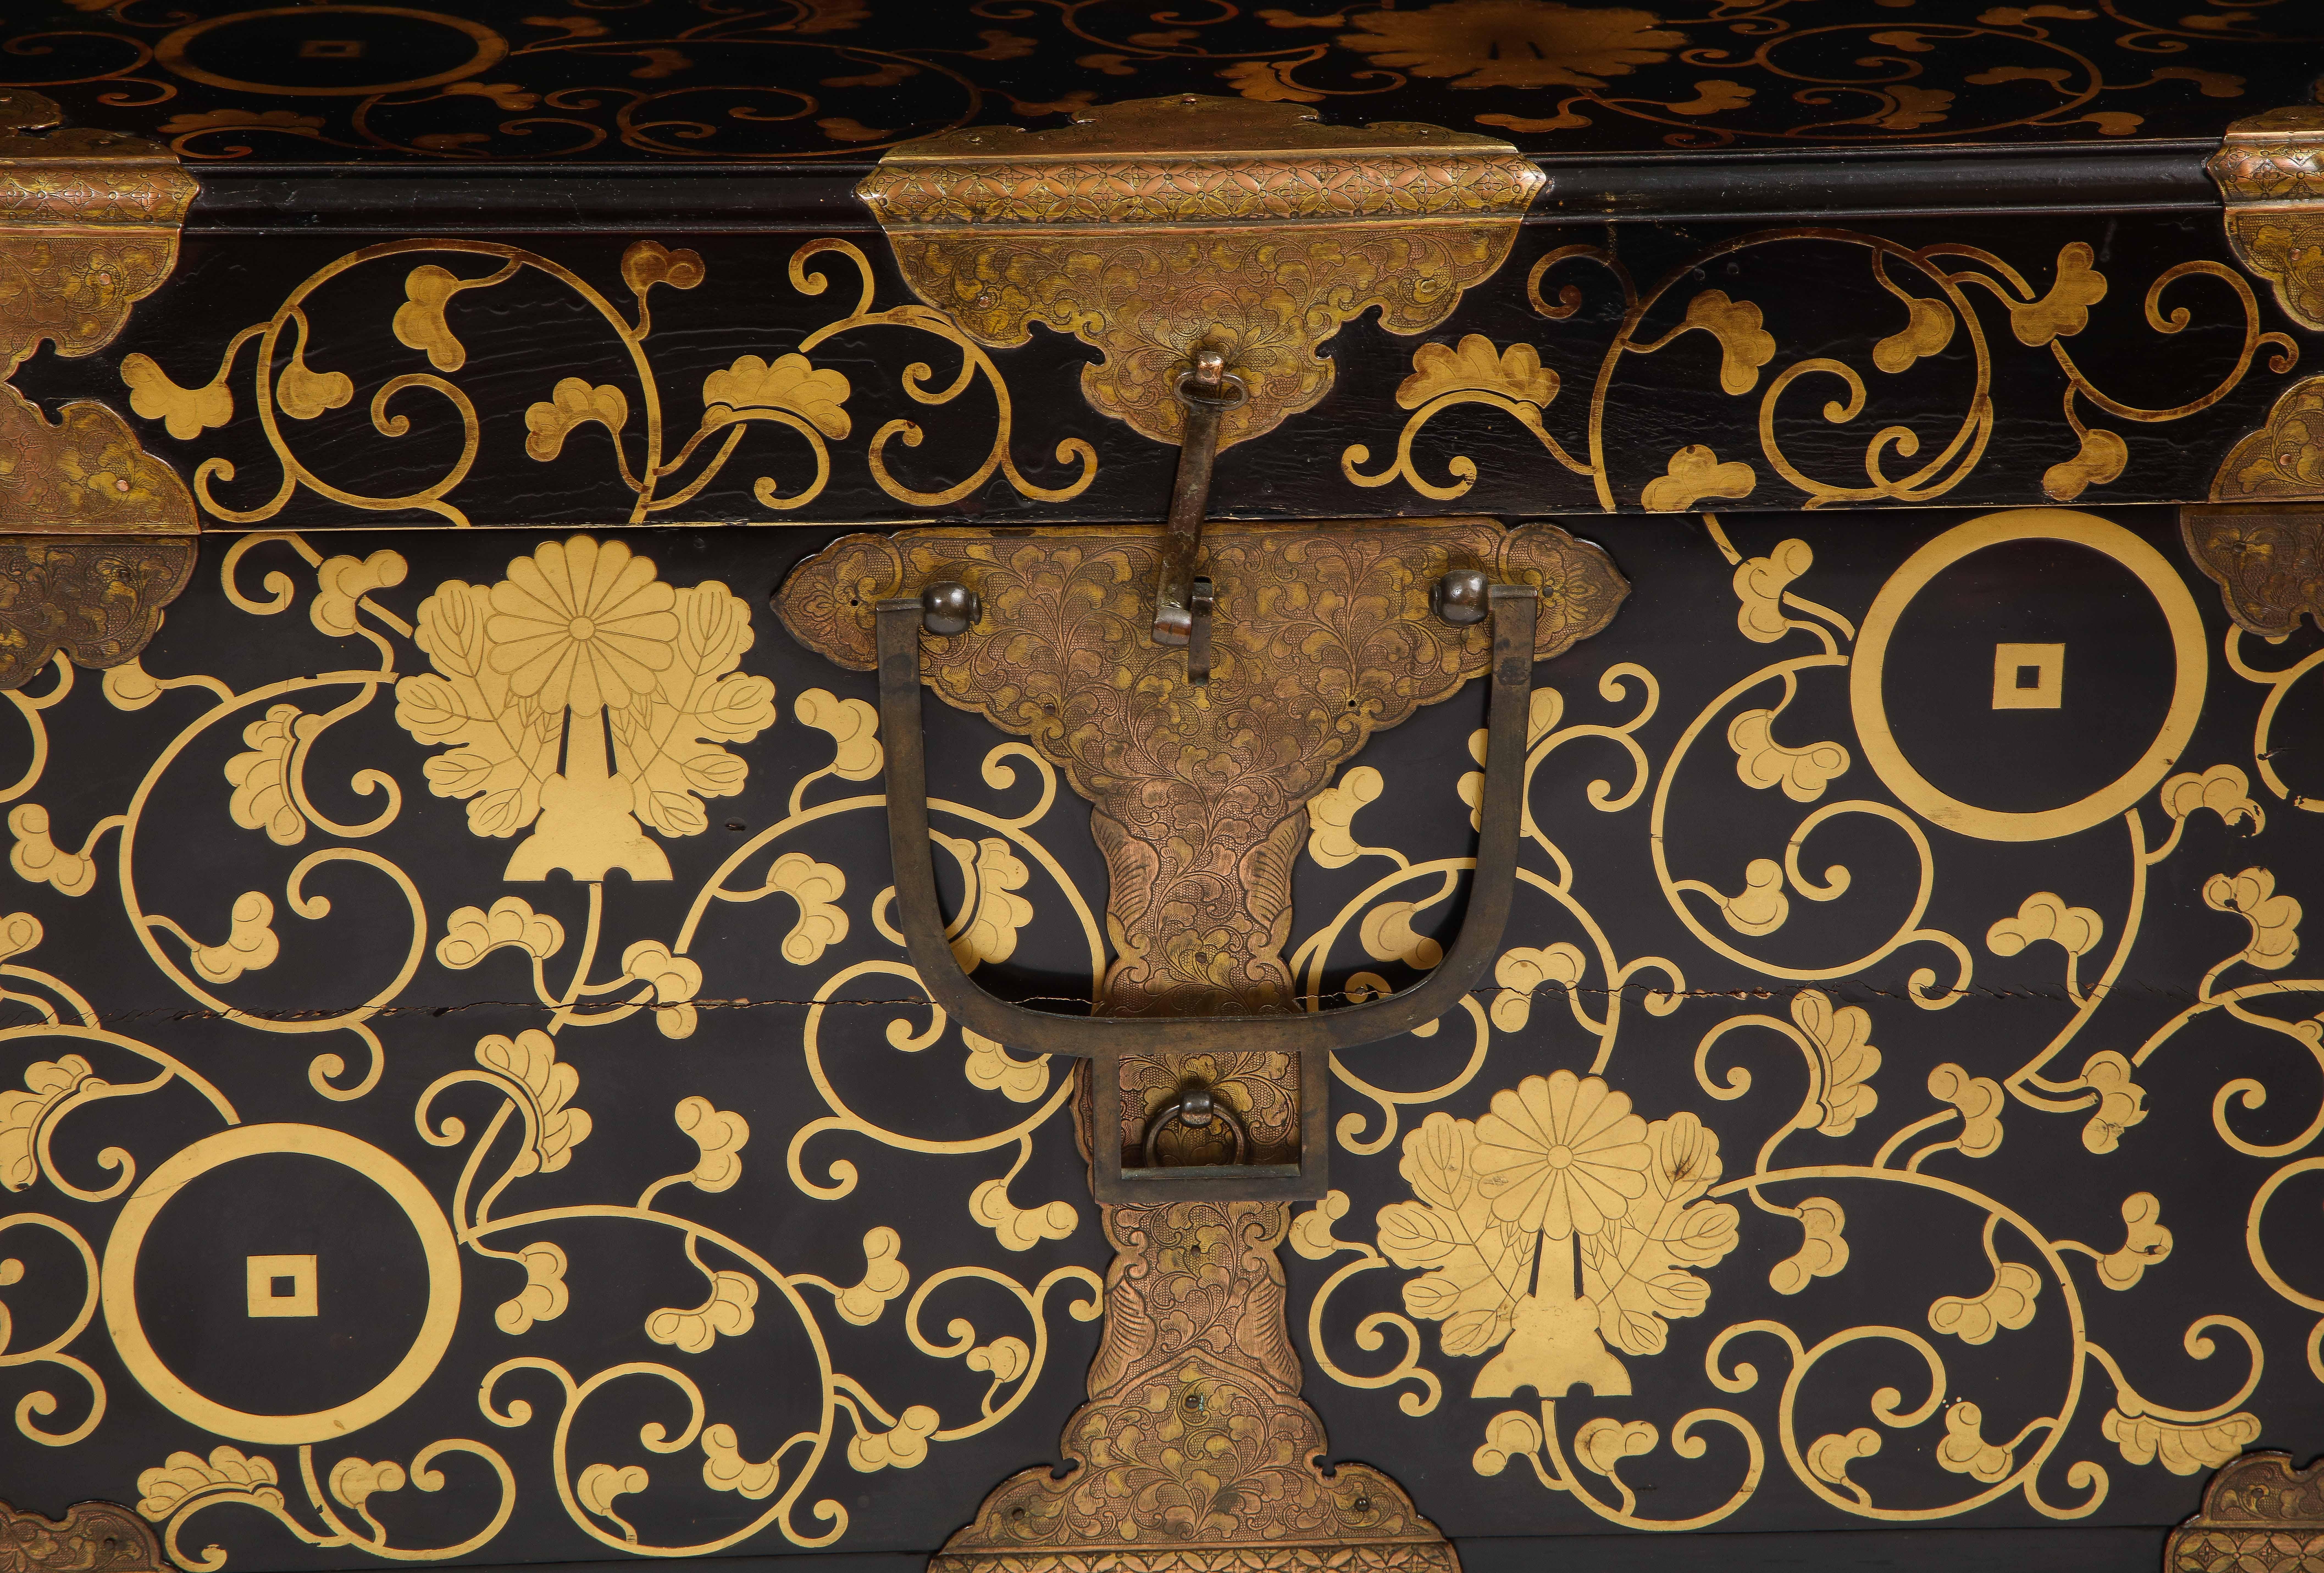  Pair of 19th Century Japanese Meiji Period Dore Bronze Mounted Lacquered Chests For Sale 4